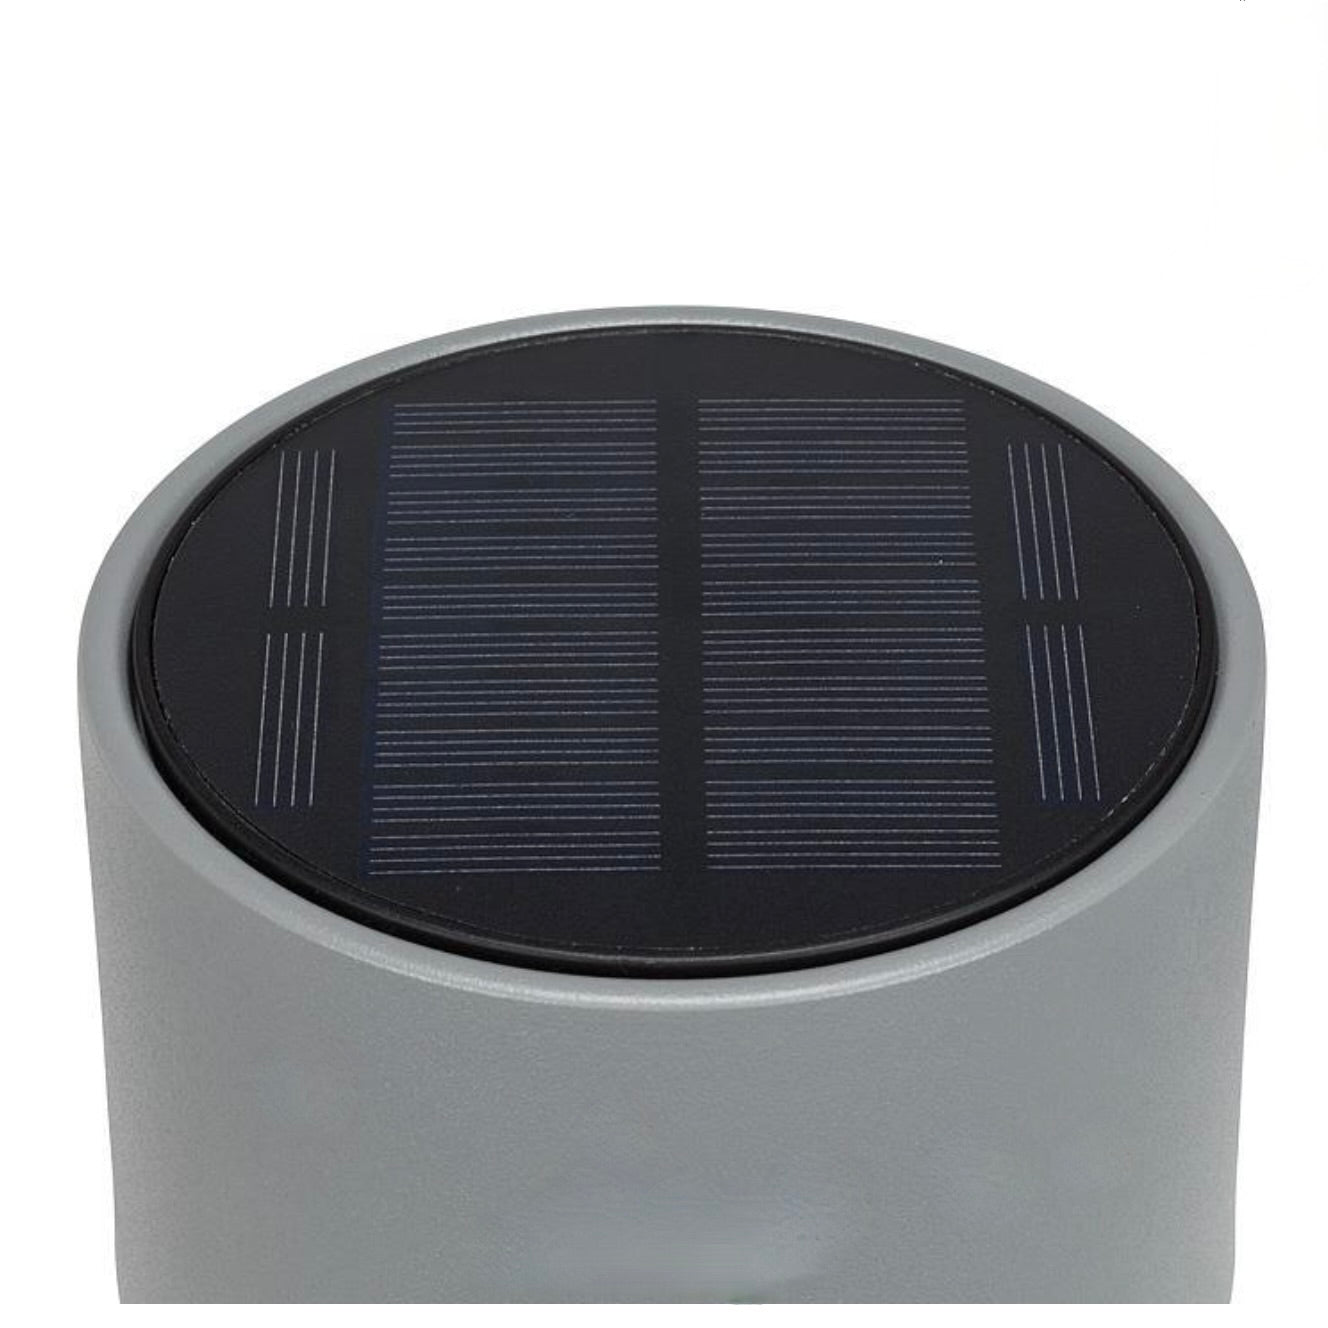 Grey Classic Solar LED Outdoor Table Lamp